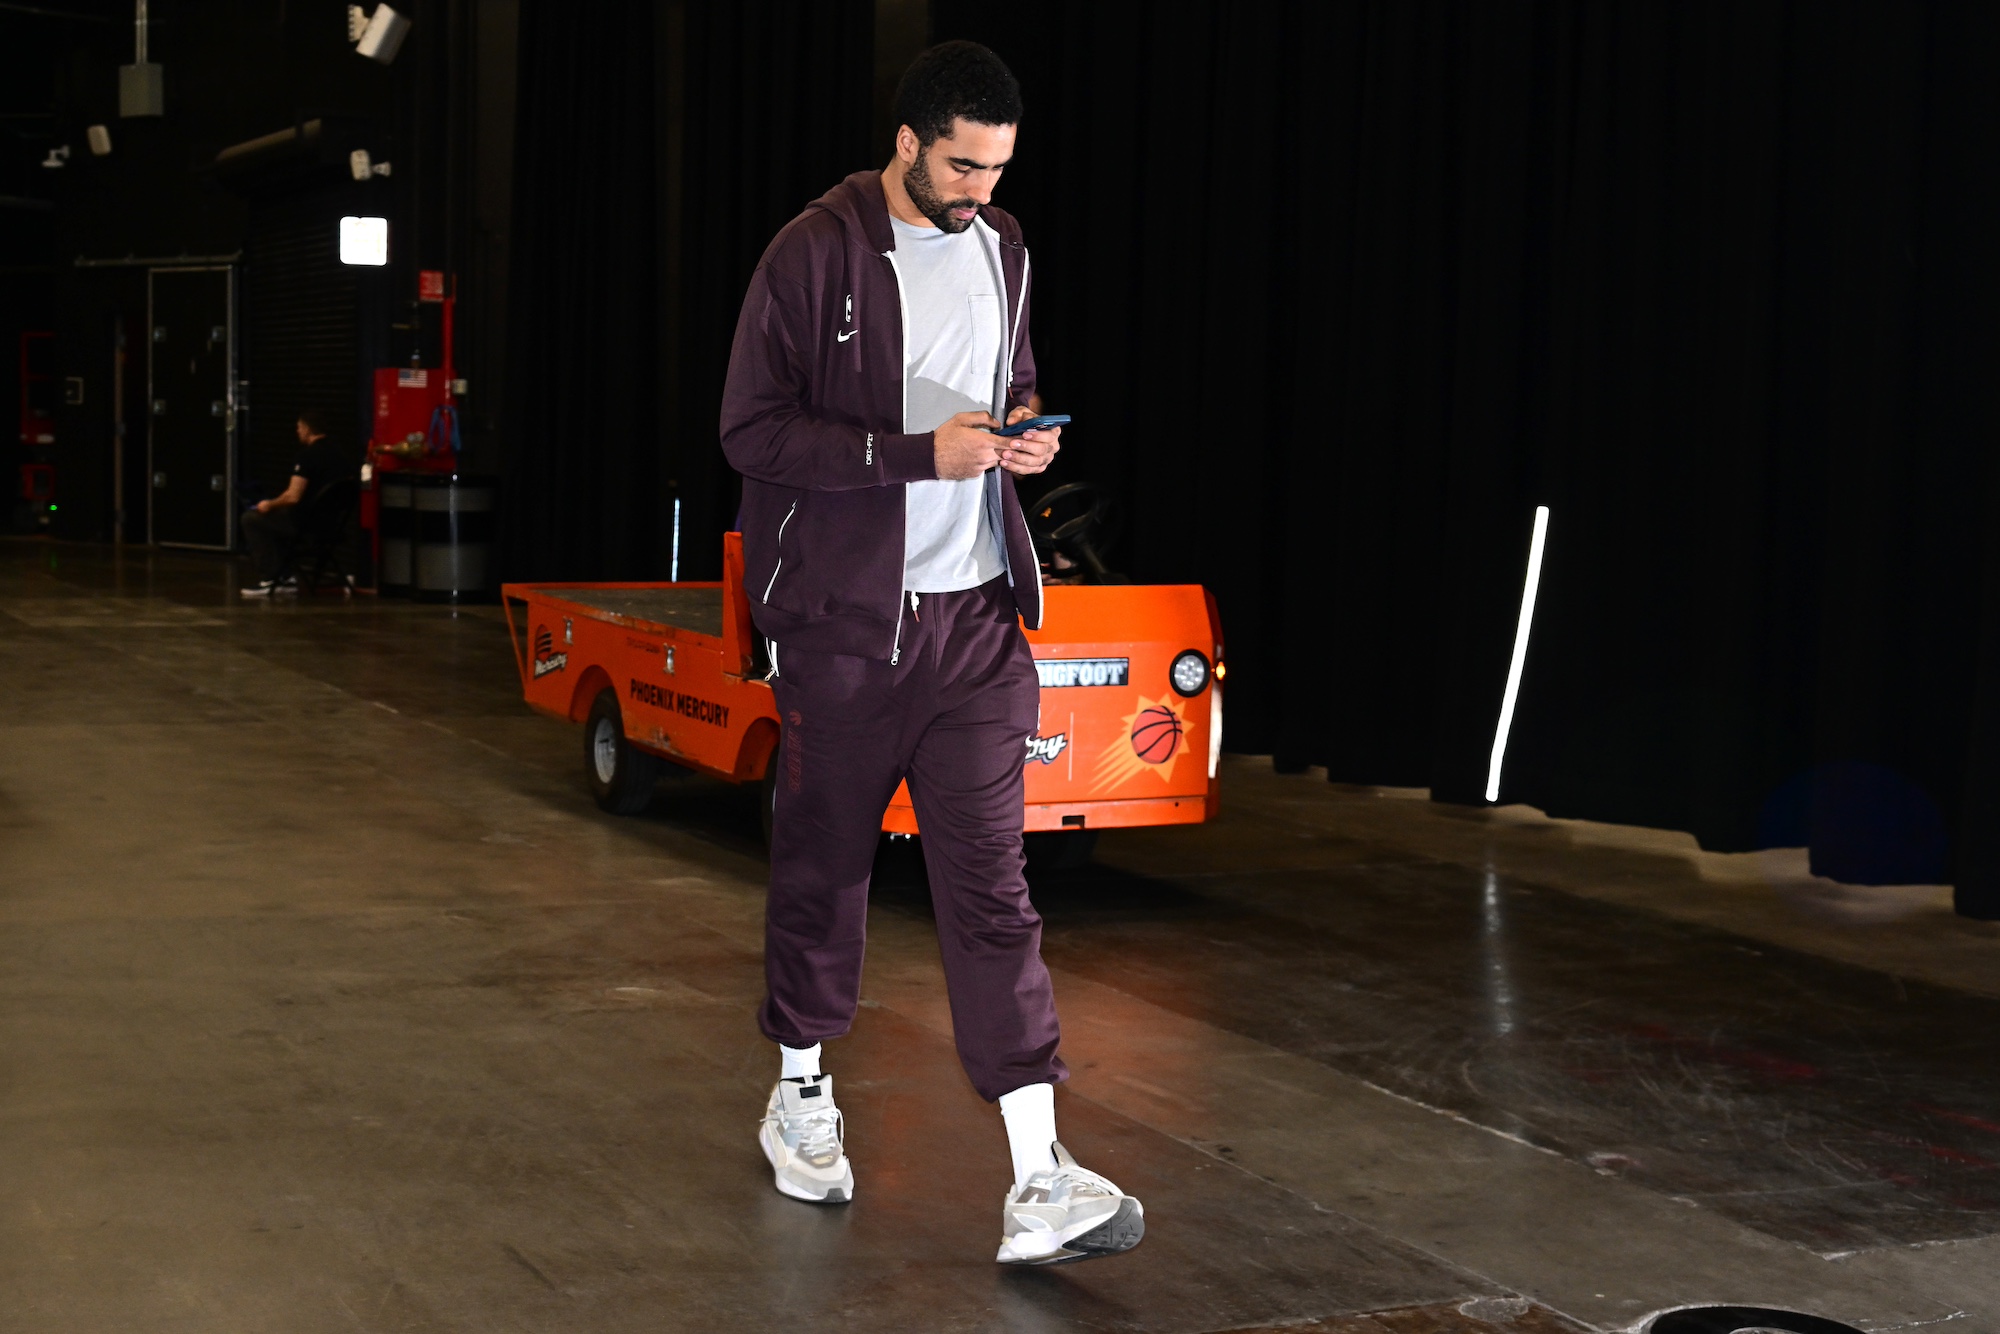 PHOENIX, AZ - MARCH 7: Jontay Porter #34 of the Toronto Raptors arrives to the arena before the game against the Phoenix Suns on March 7, 2024 at Footprint Center in Phoenix, Arizona. NOTE TO USER: User expressly acknowledges and agrees that, by downloading and or using this photograph, user is consenting to the terms and conditions of the Getty Images License Agreement. Mandatory Copyright Notice: Copyright 2024 NBAE (Photo by Kate Frese/NBAE via Getty Images)